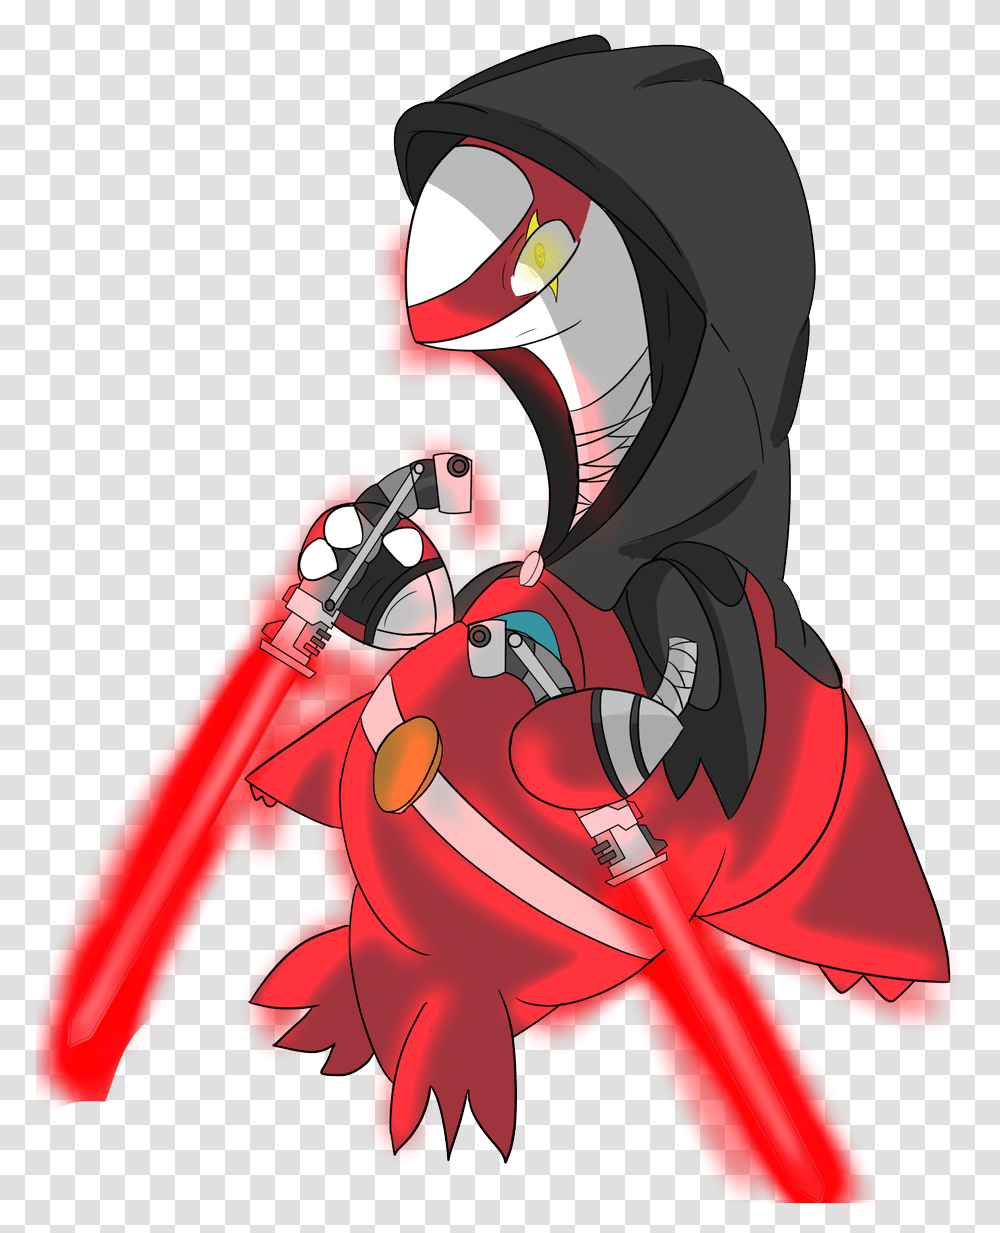 Join To The Dark Side We Can Conquer All The Galaxy Illustration, Costume, Weapon Transparent Png